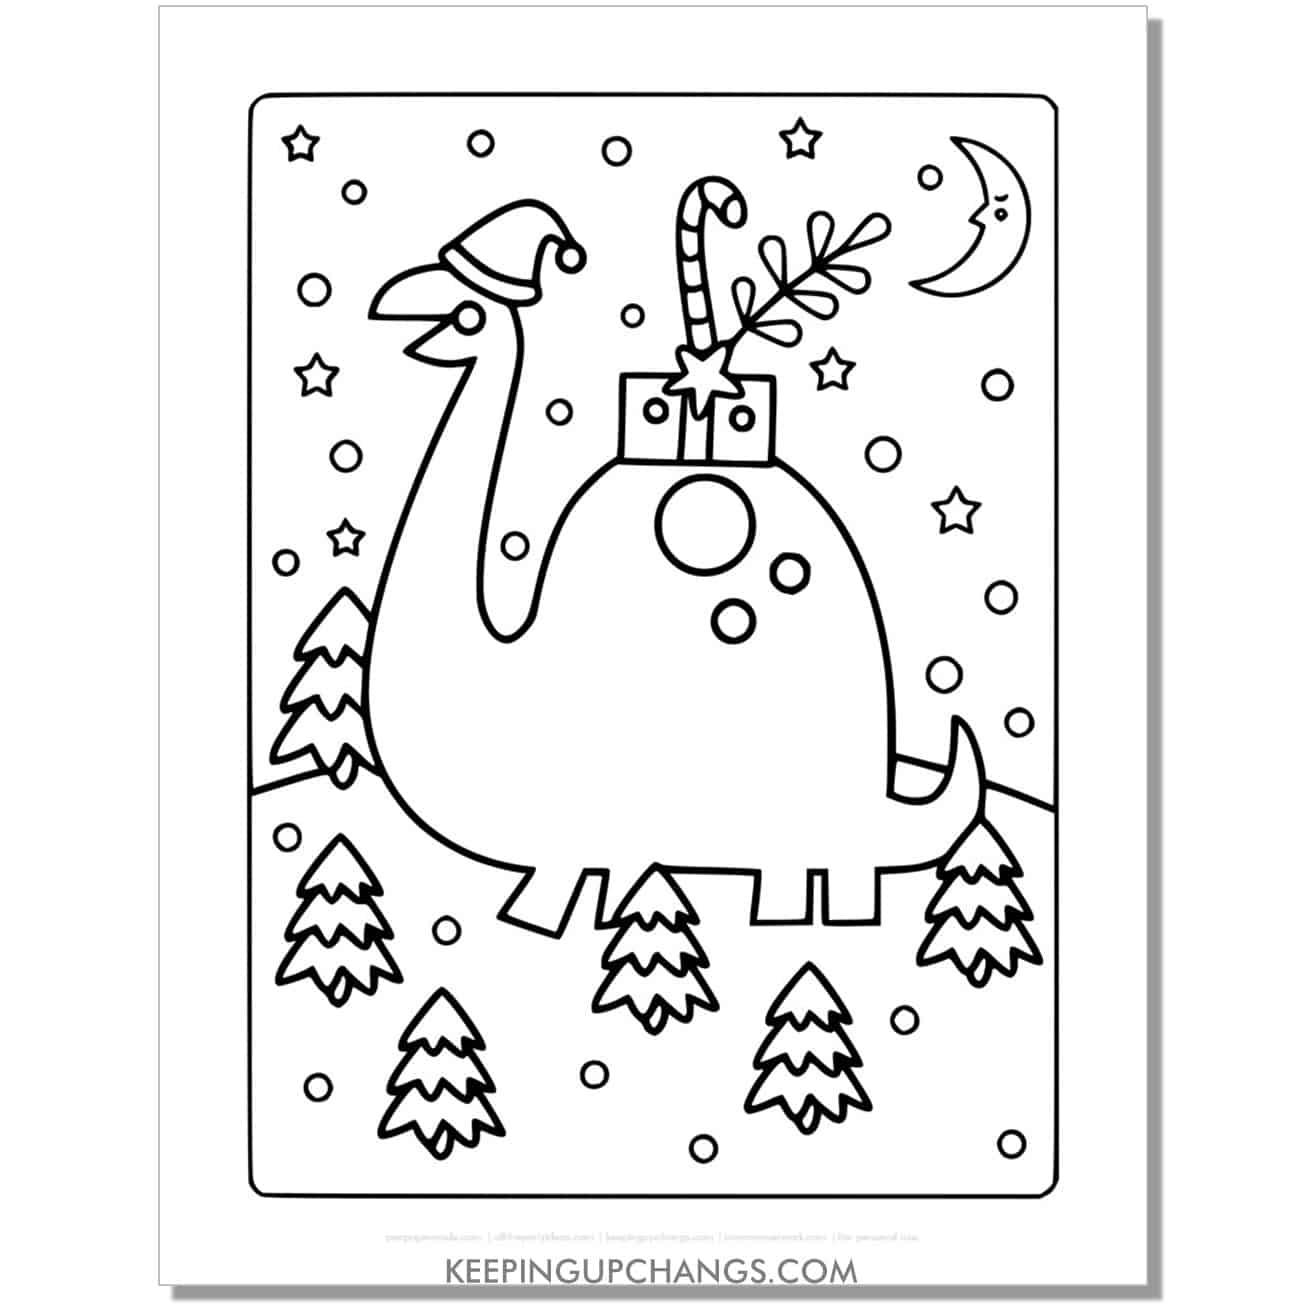 free full size christmas brontosaurus dinosaur with trees, gift, falling snow coloring page.